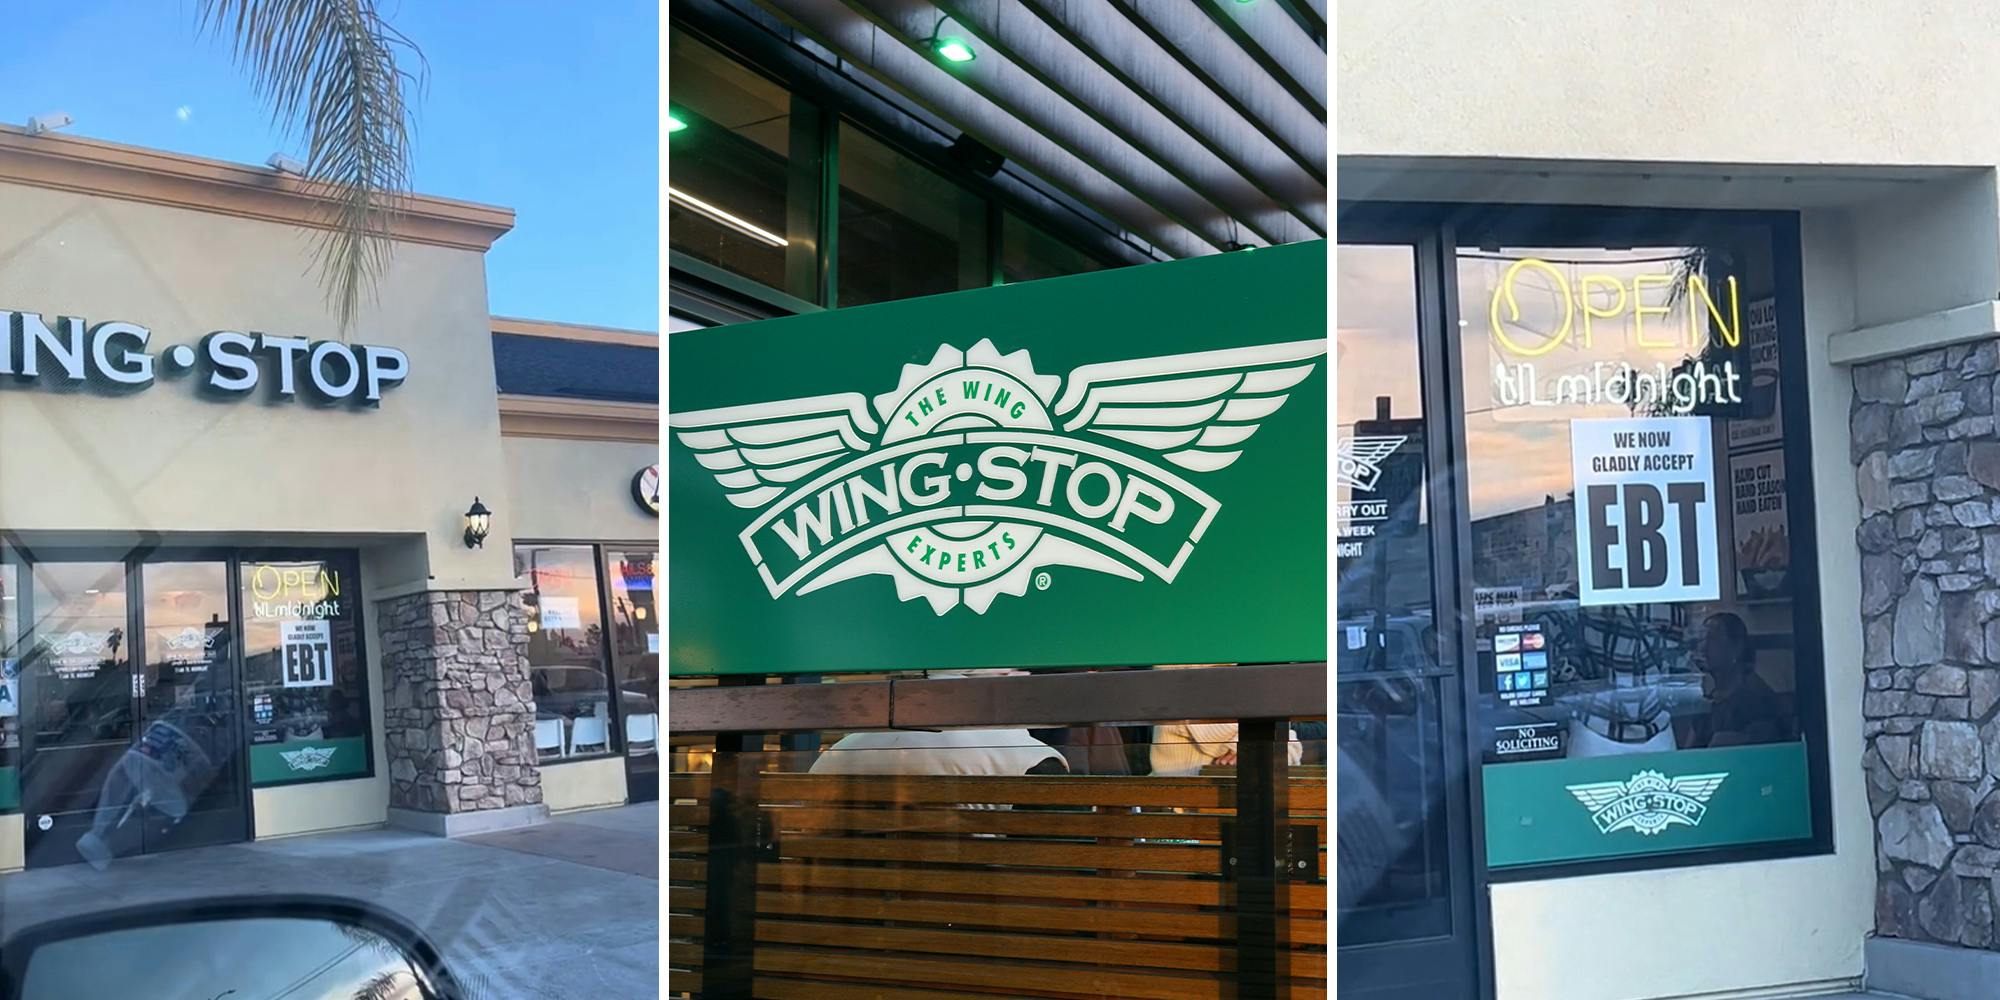 ‘I can finally eat there’: Customer reveals Wingstop is now accepting EBT